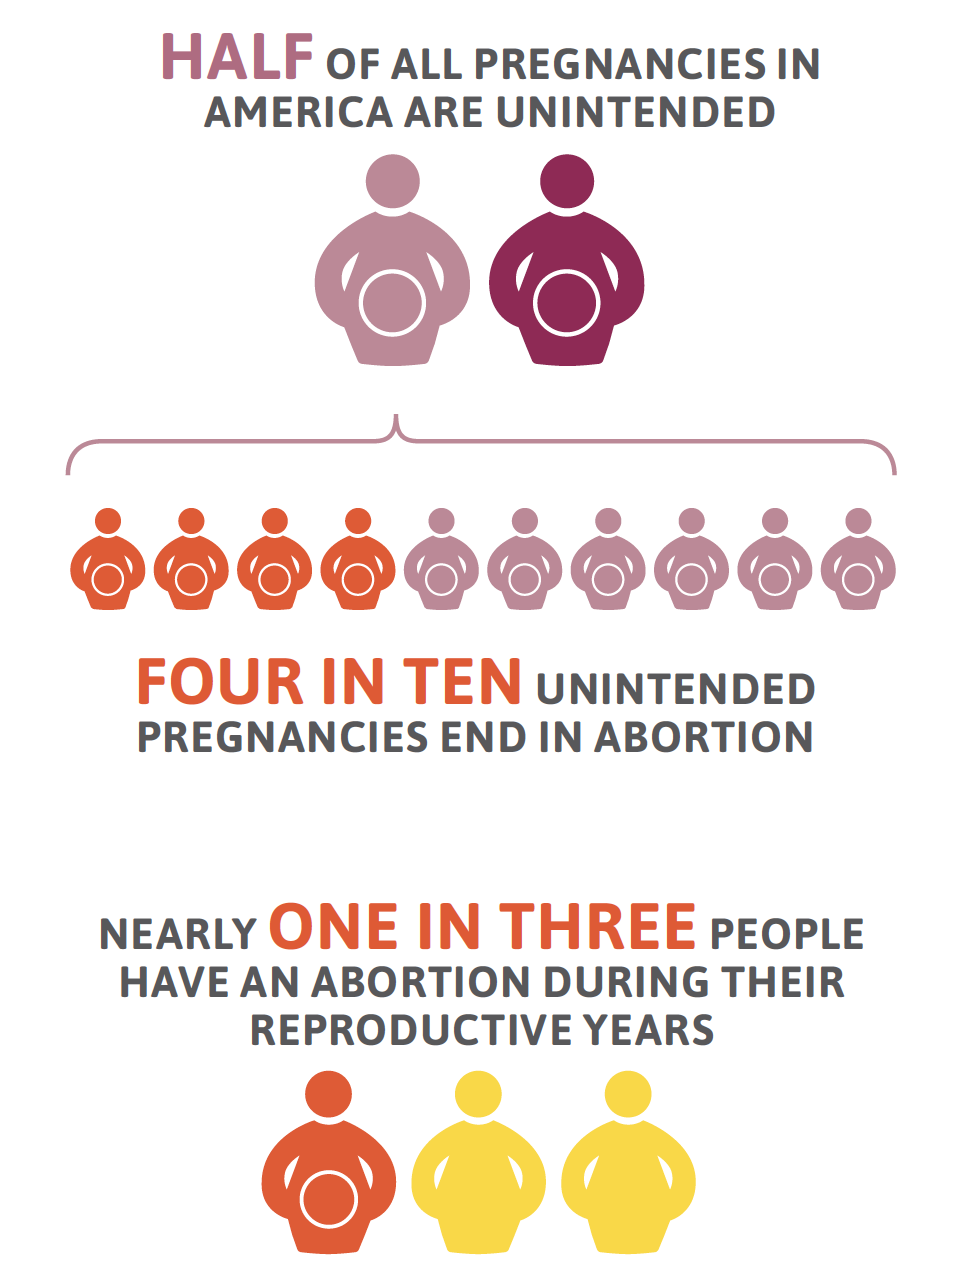 Infographic showing abortion data